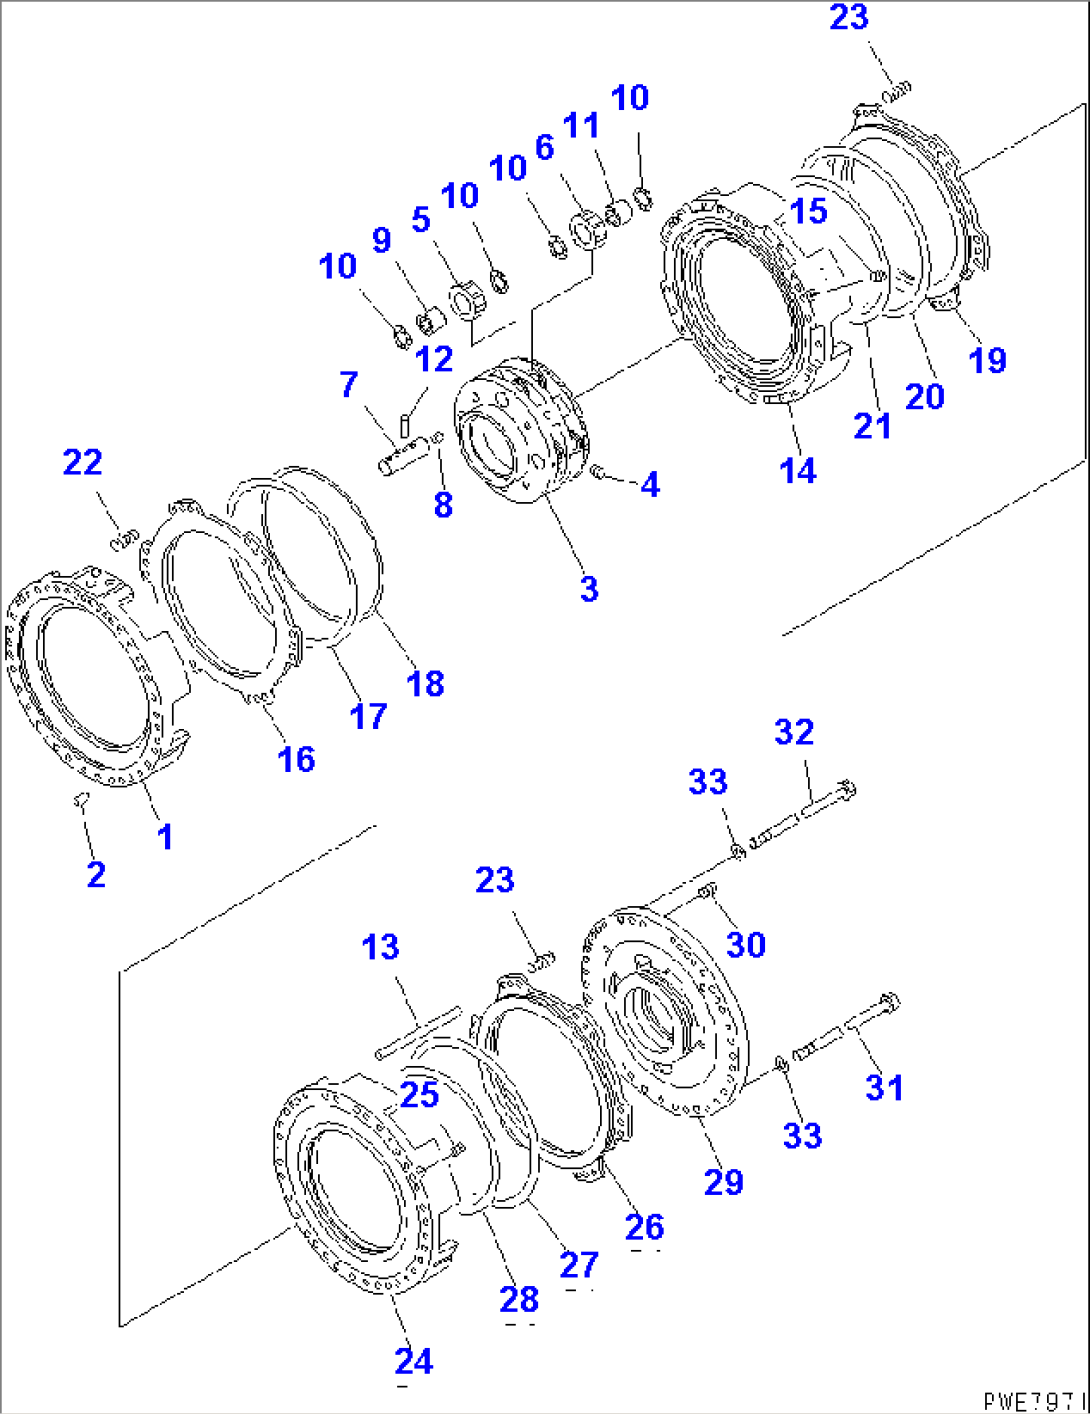 TRANSMISSION FORWARD¤ 4TH¤ AND REVERSE CLUTCH